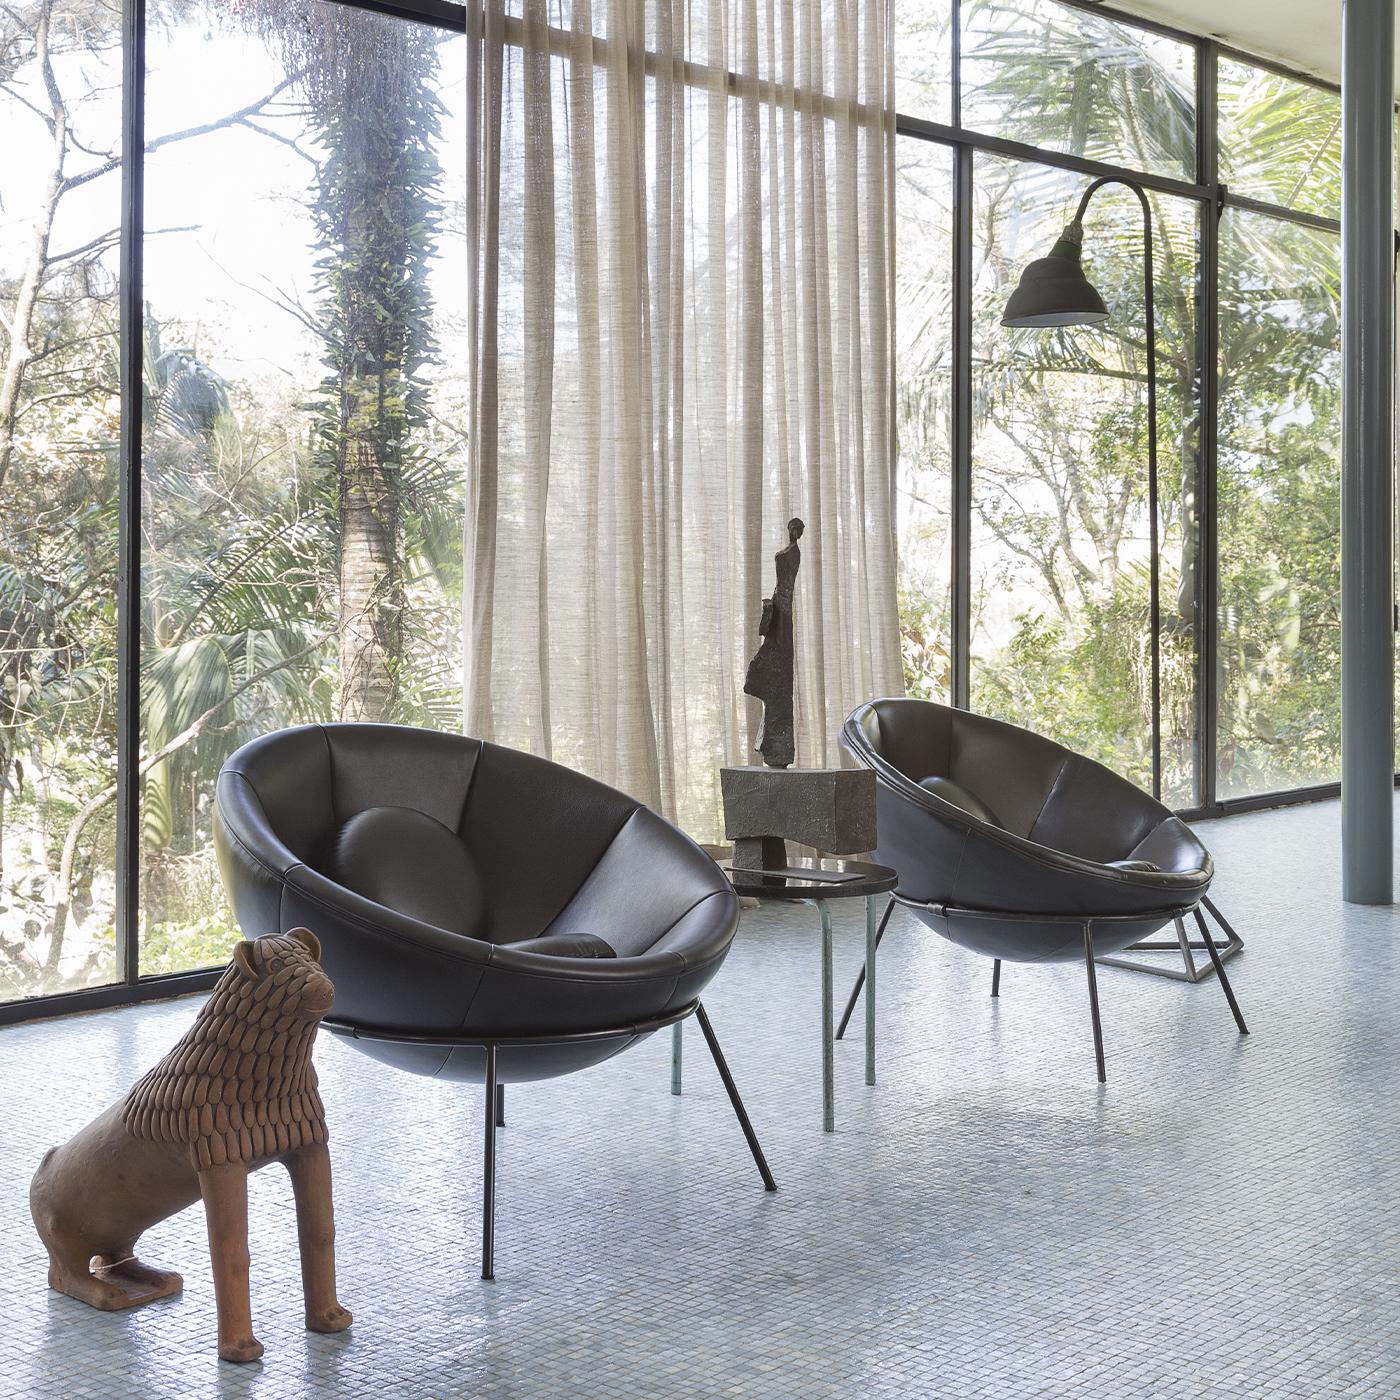 Designed in 1951 by Lina Bo Bardi, the Bardi’s bowl chair is considered a modern design icon. Conceived with an essential frame and universal shape - a semi spherical seat resting lightly on a metallic ring structure supported by four legs - it